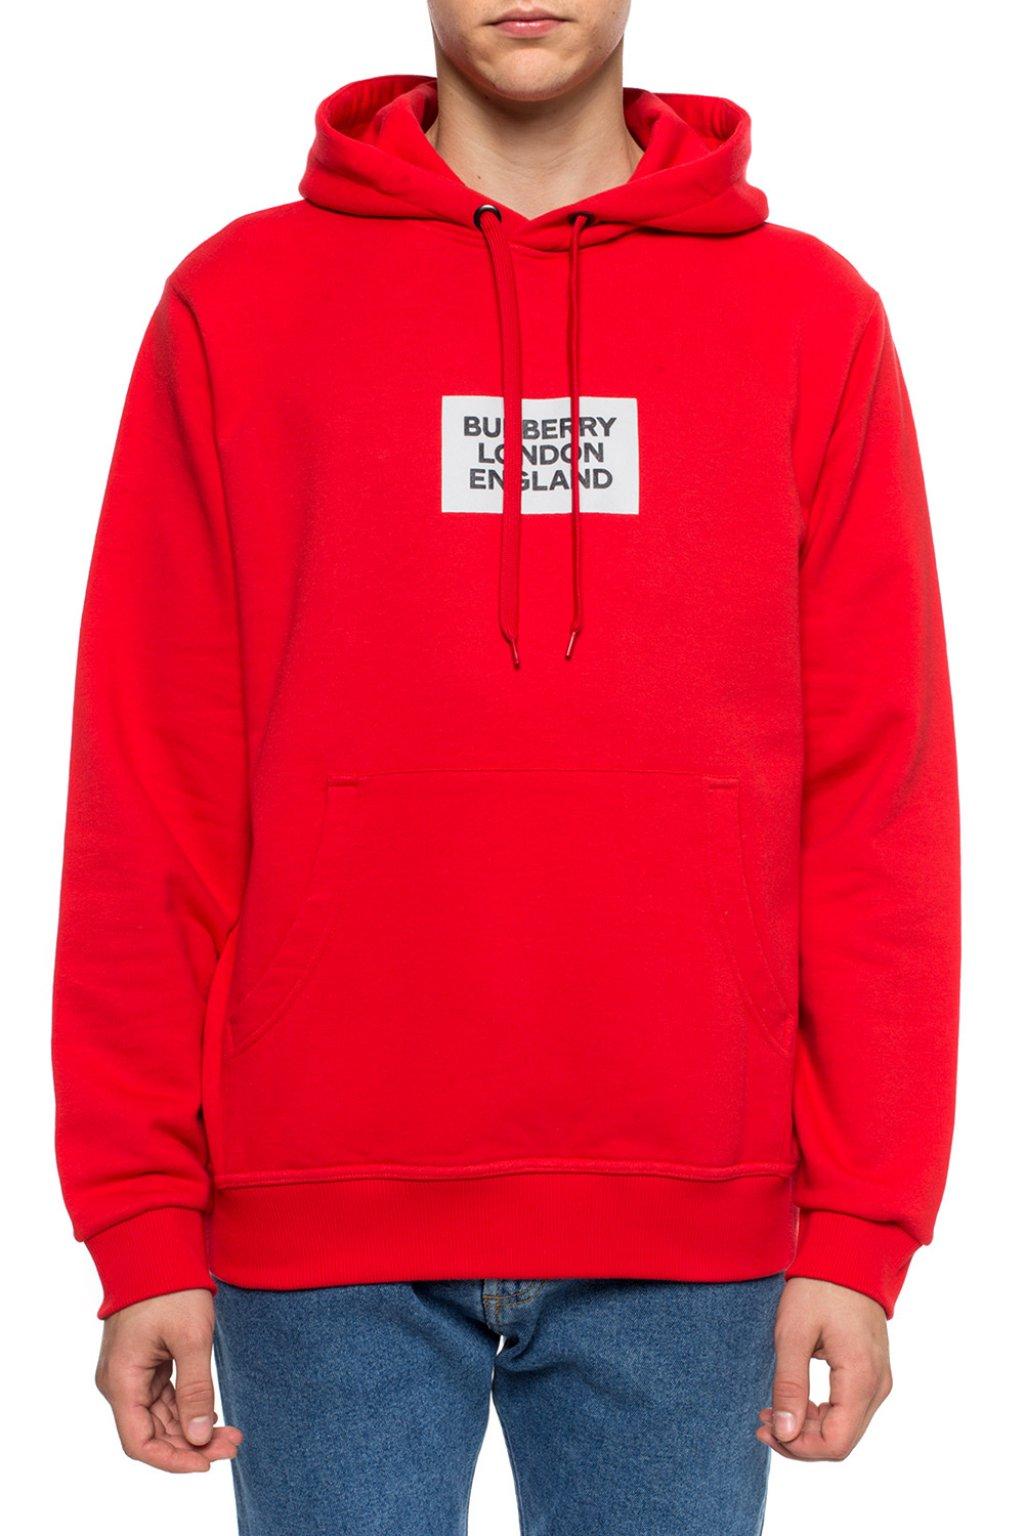 Burberry Logo Print Cotton Hoodie in Bright Red (Red) for Men - Lyst